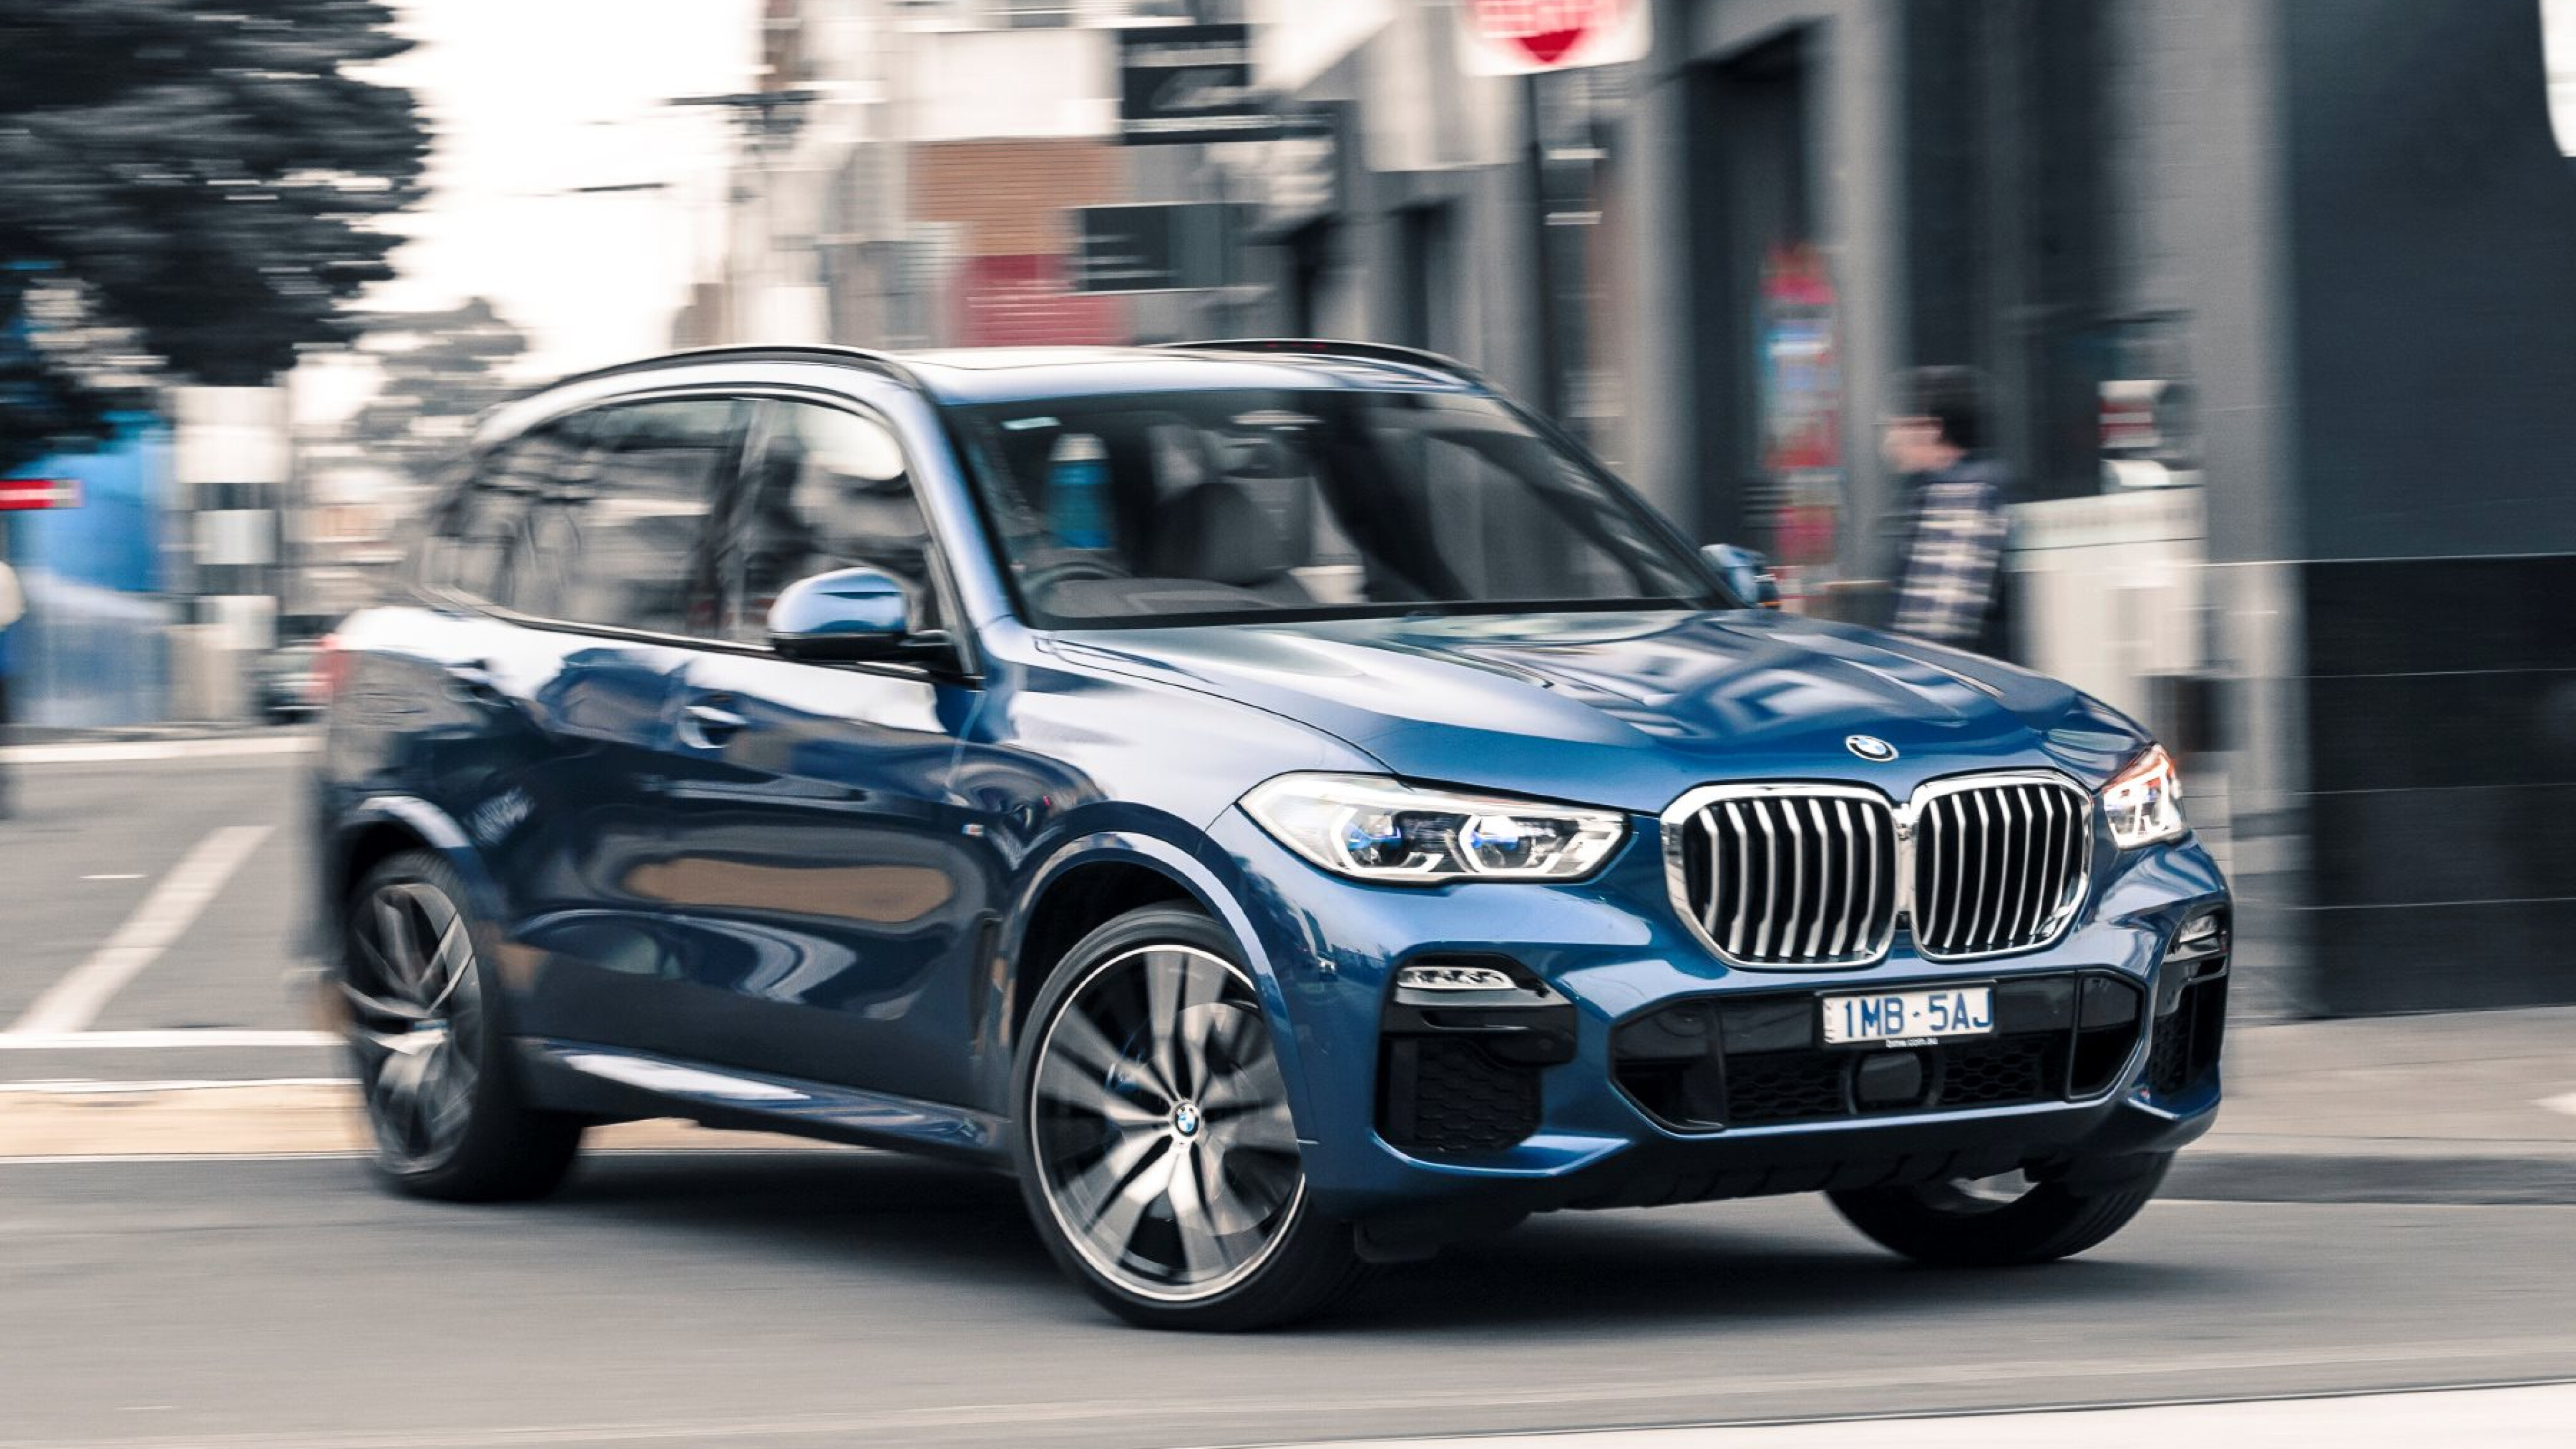 2019 BMW X5 xDrive 30d M Sport: owner review - Drive